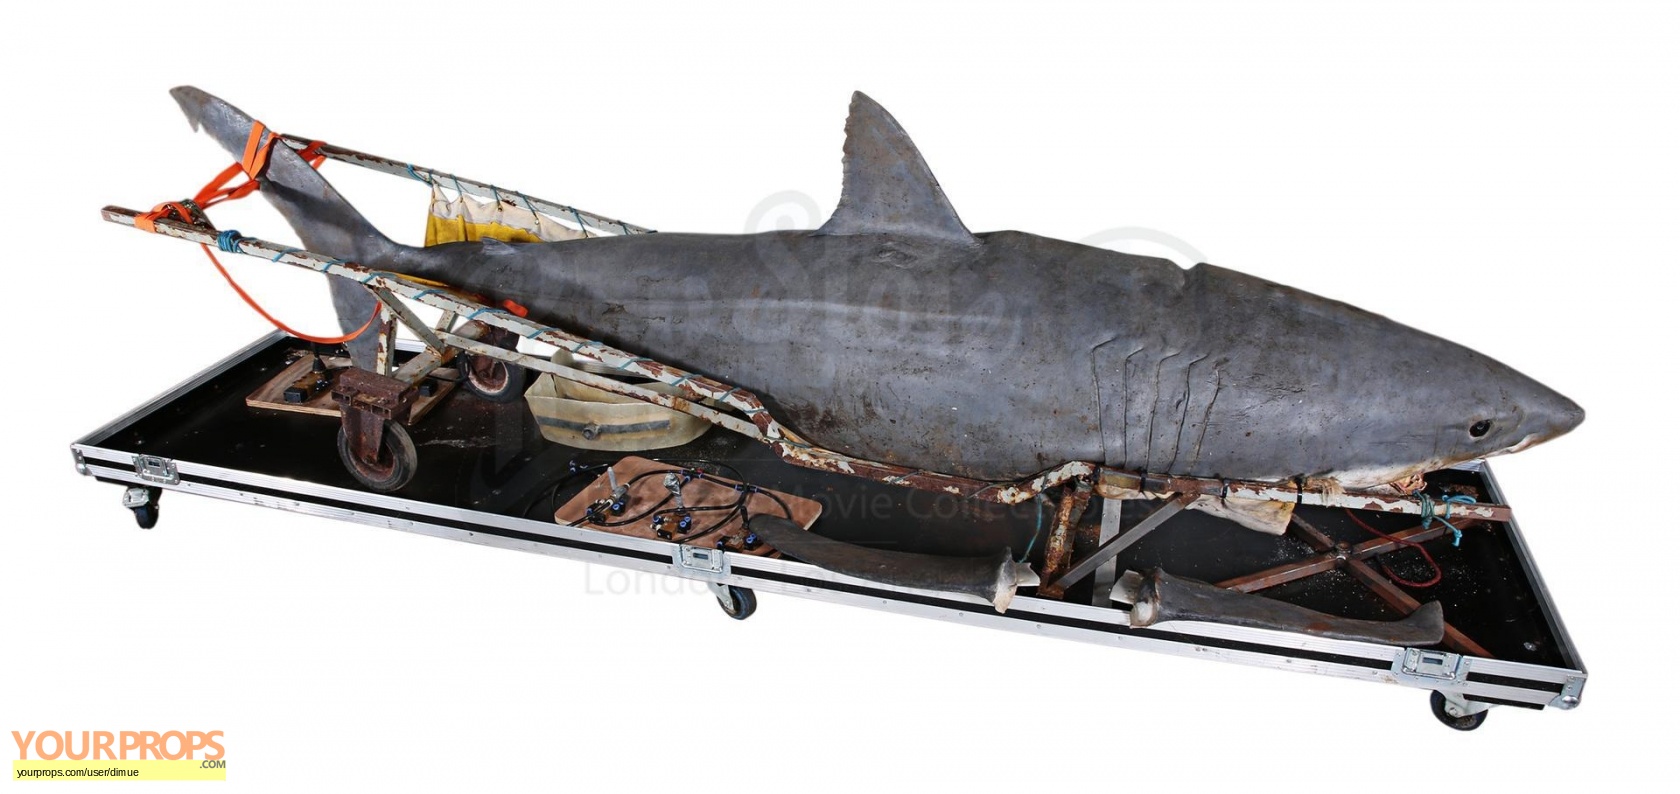 https://www.yourprops.com/movieprops/original/yp5e808087c9ebe5.84225390/Unknown-Movie-Animatronic-Great-White-Shark-Puppet-with-Controls-1.jpg